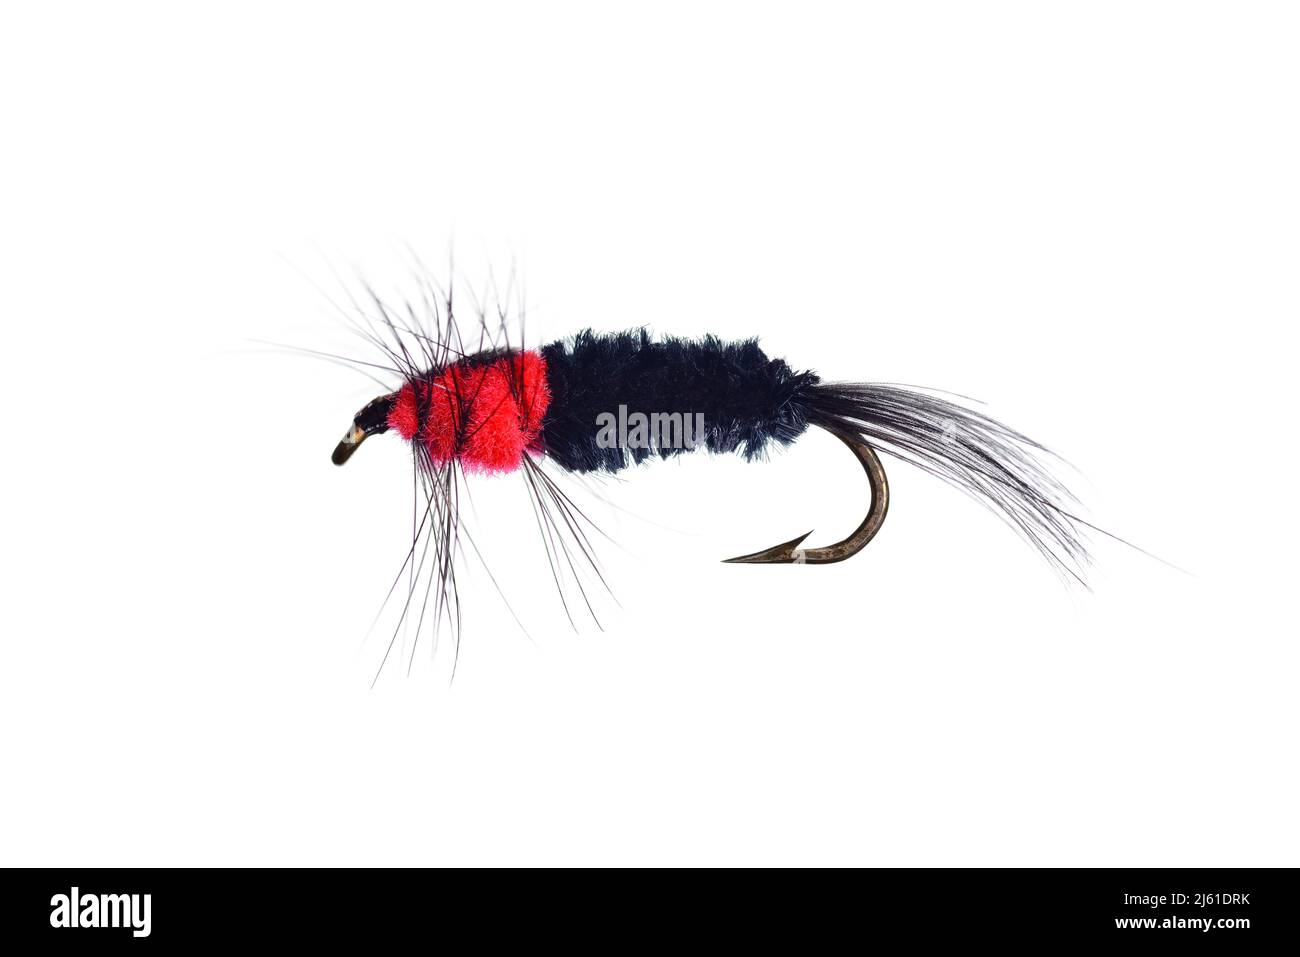 Fly Fishing Fly, Cut Out Stock Photo